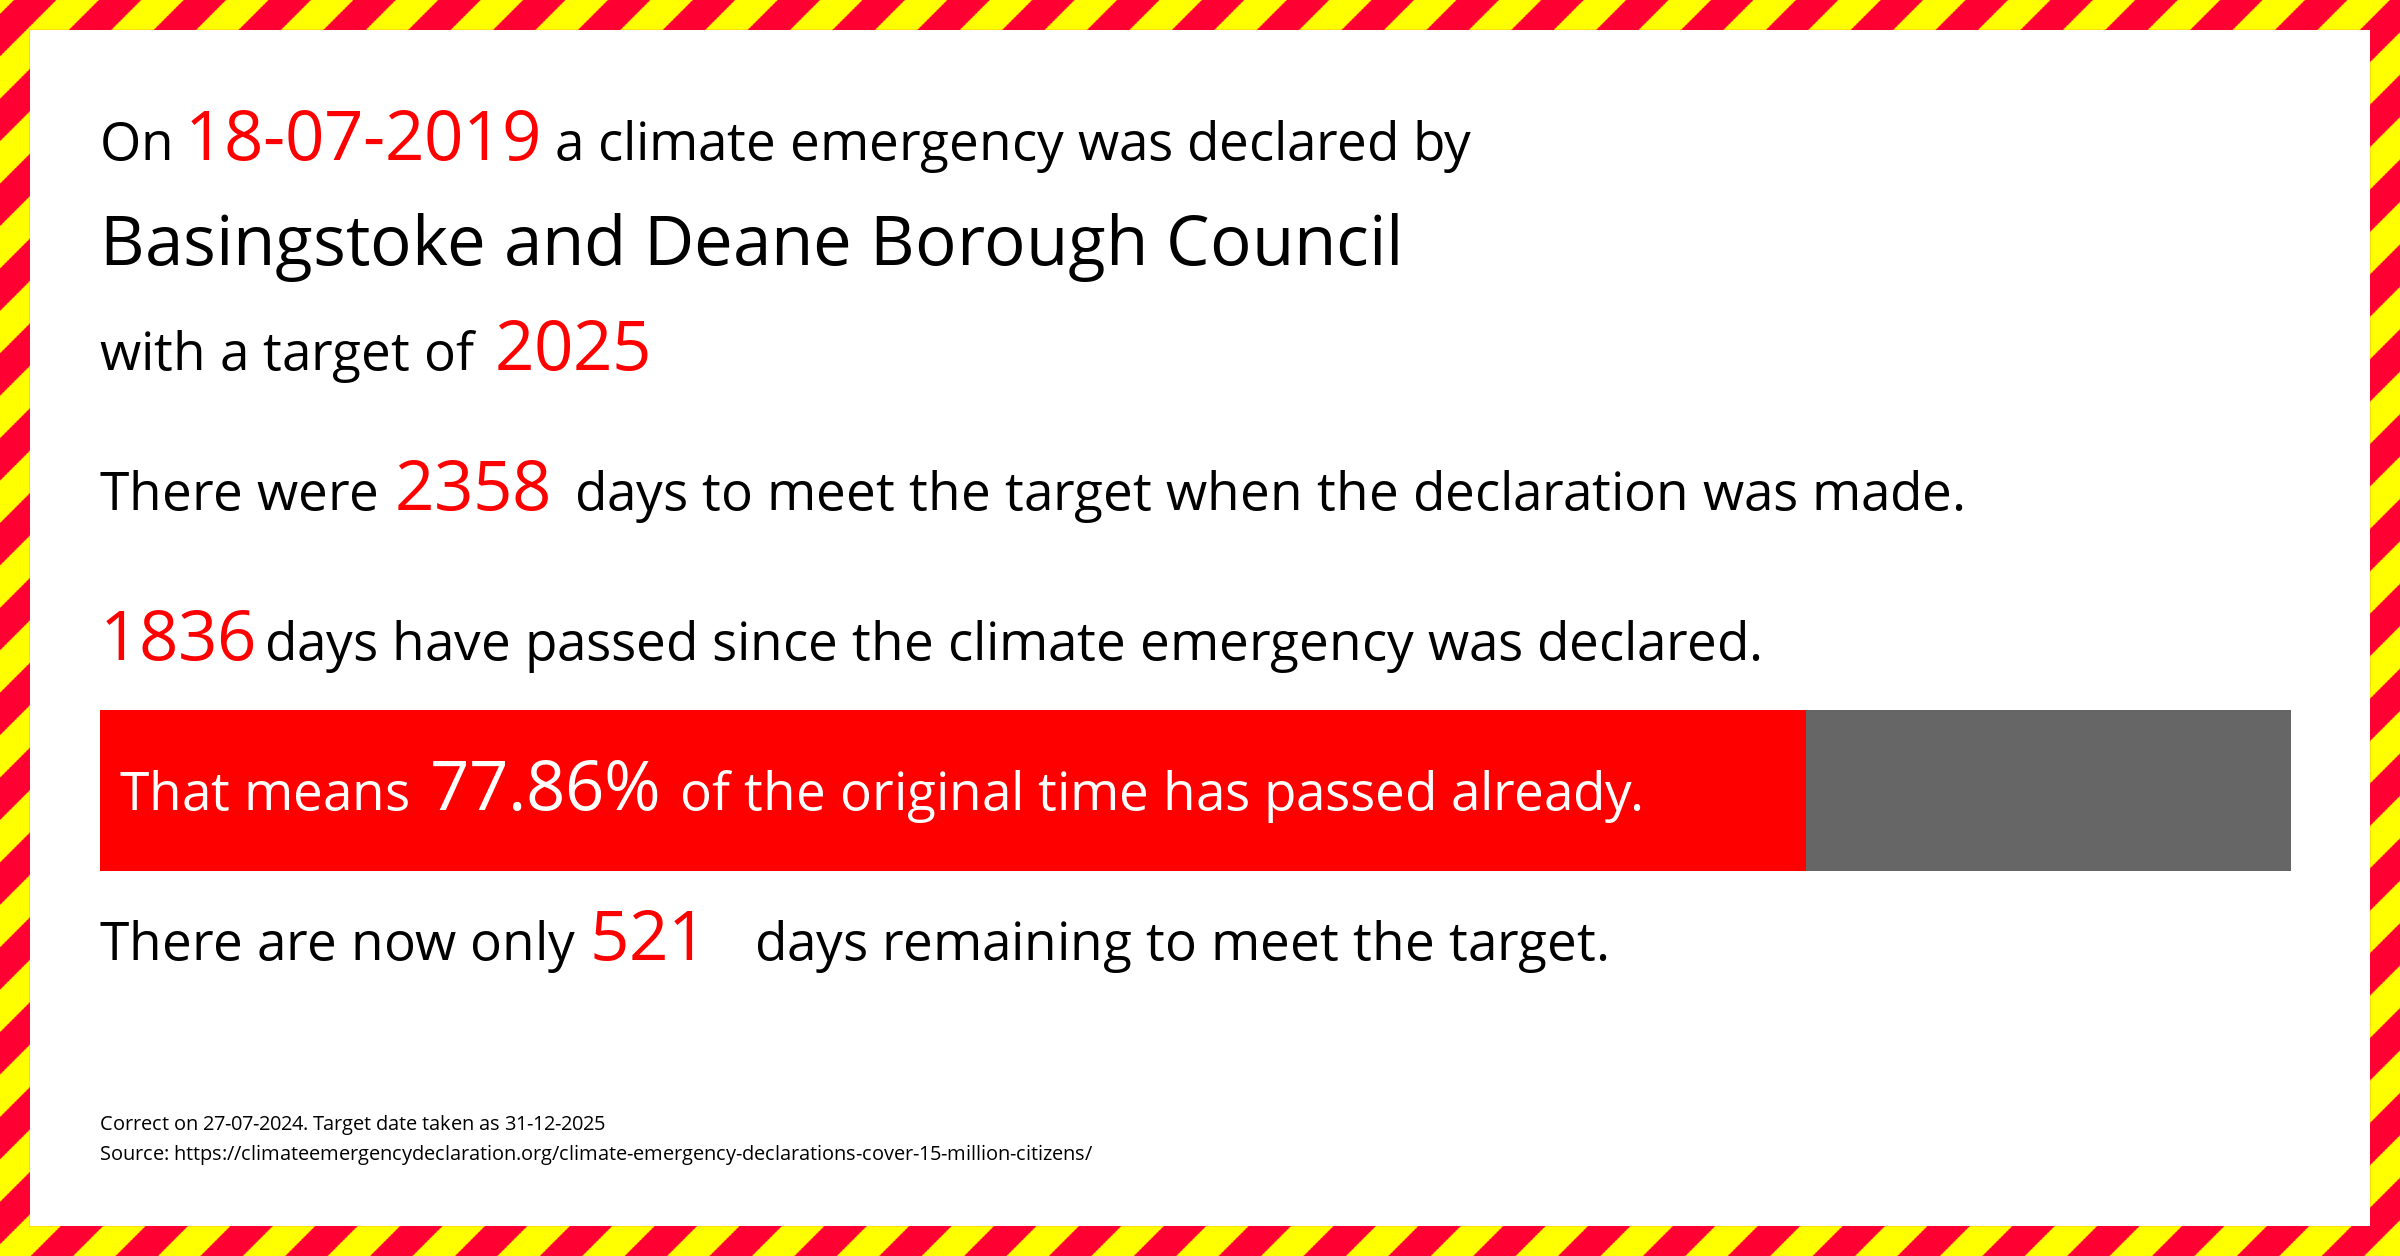 Basingstoke and Deane Borough Council declared a Climate emergency on Thursday 18th July 2019, with a target of 2025.